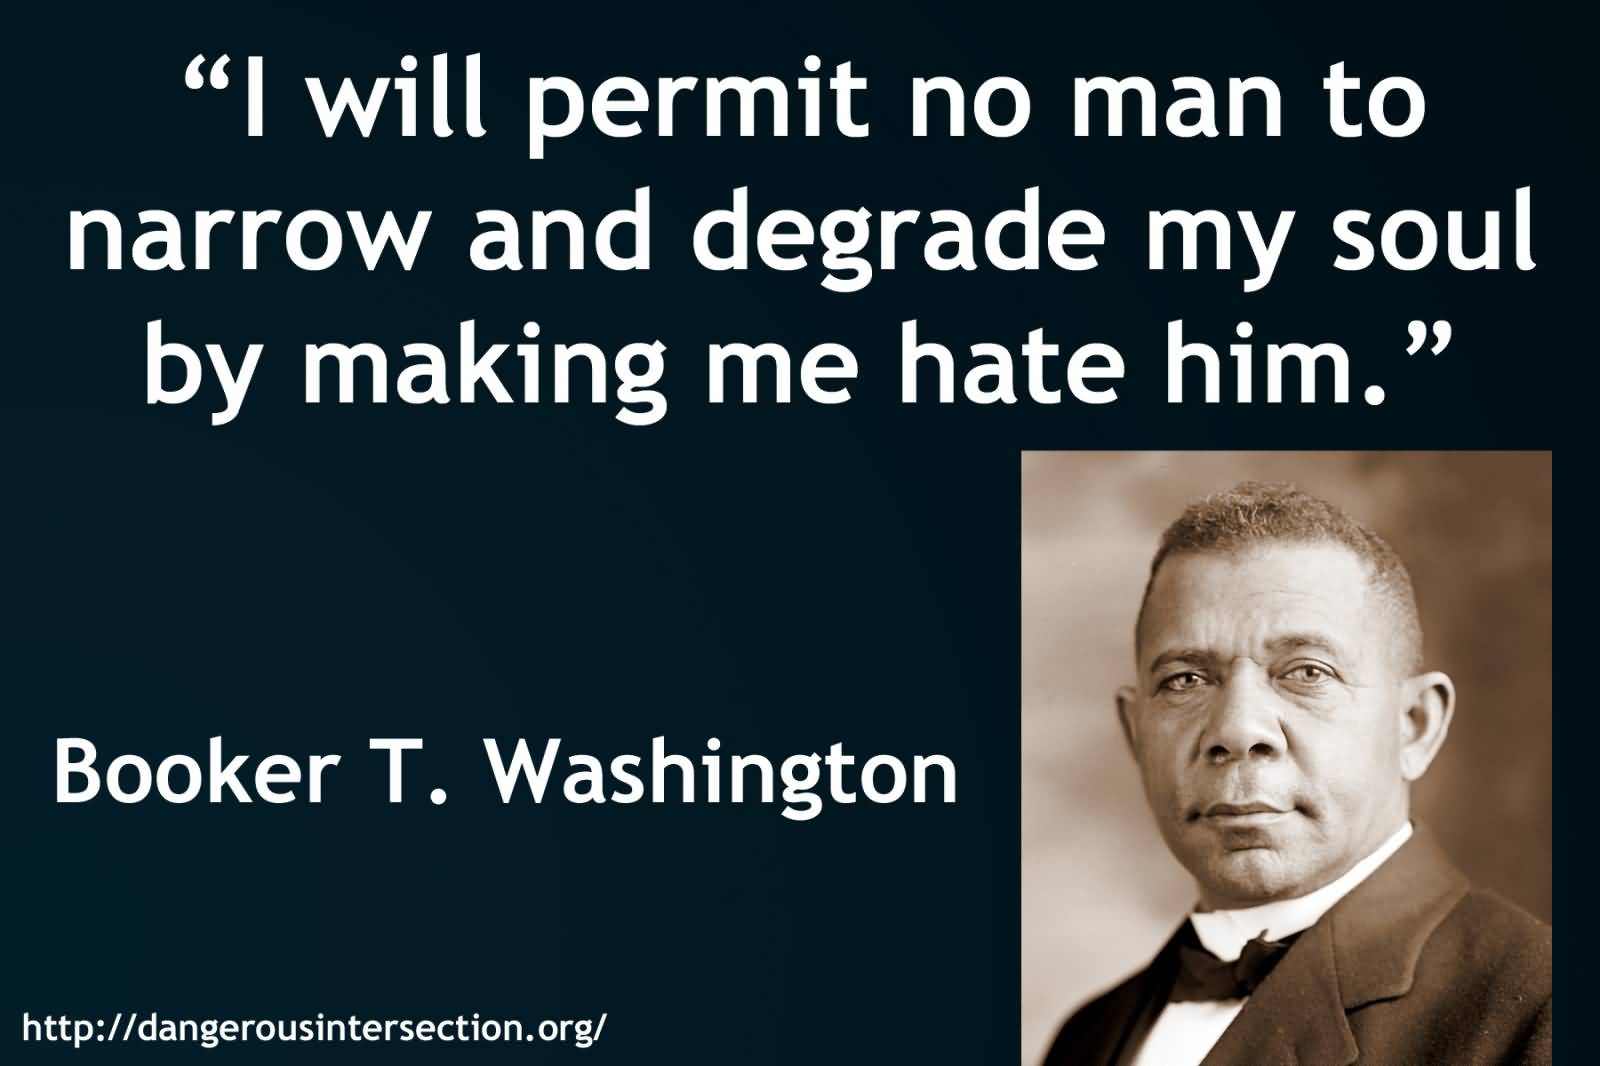 I will permit no man to narrow and degrade my soul by making me hate him - Booker T. Washington